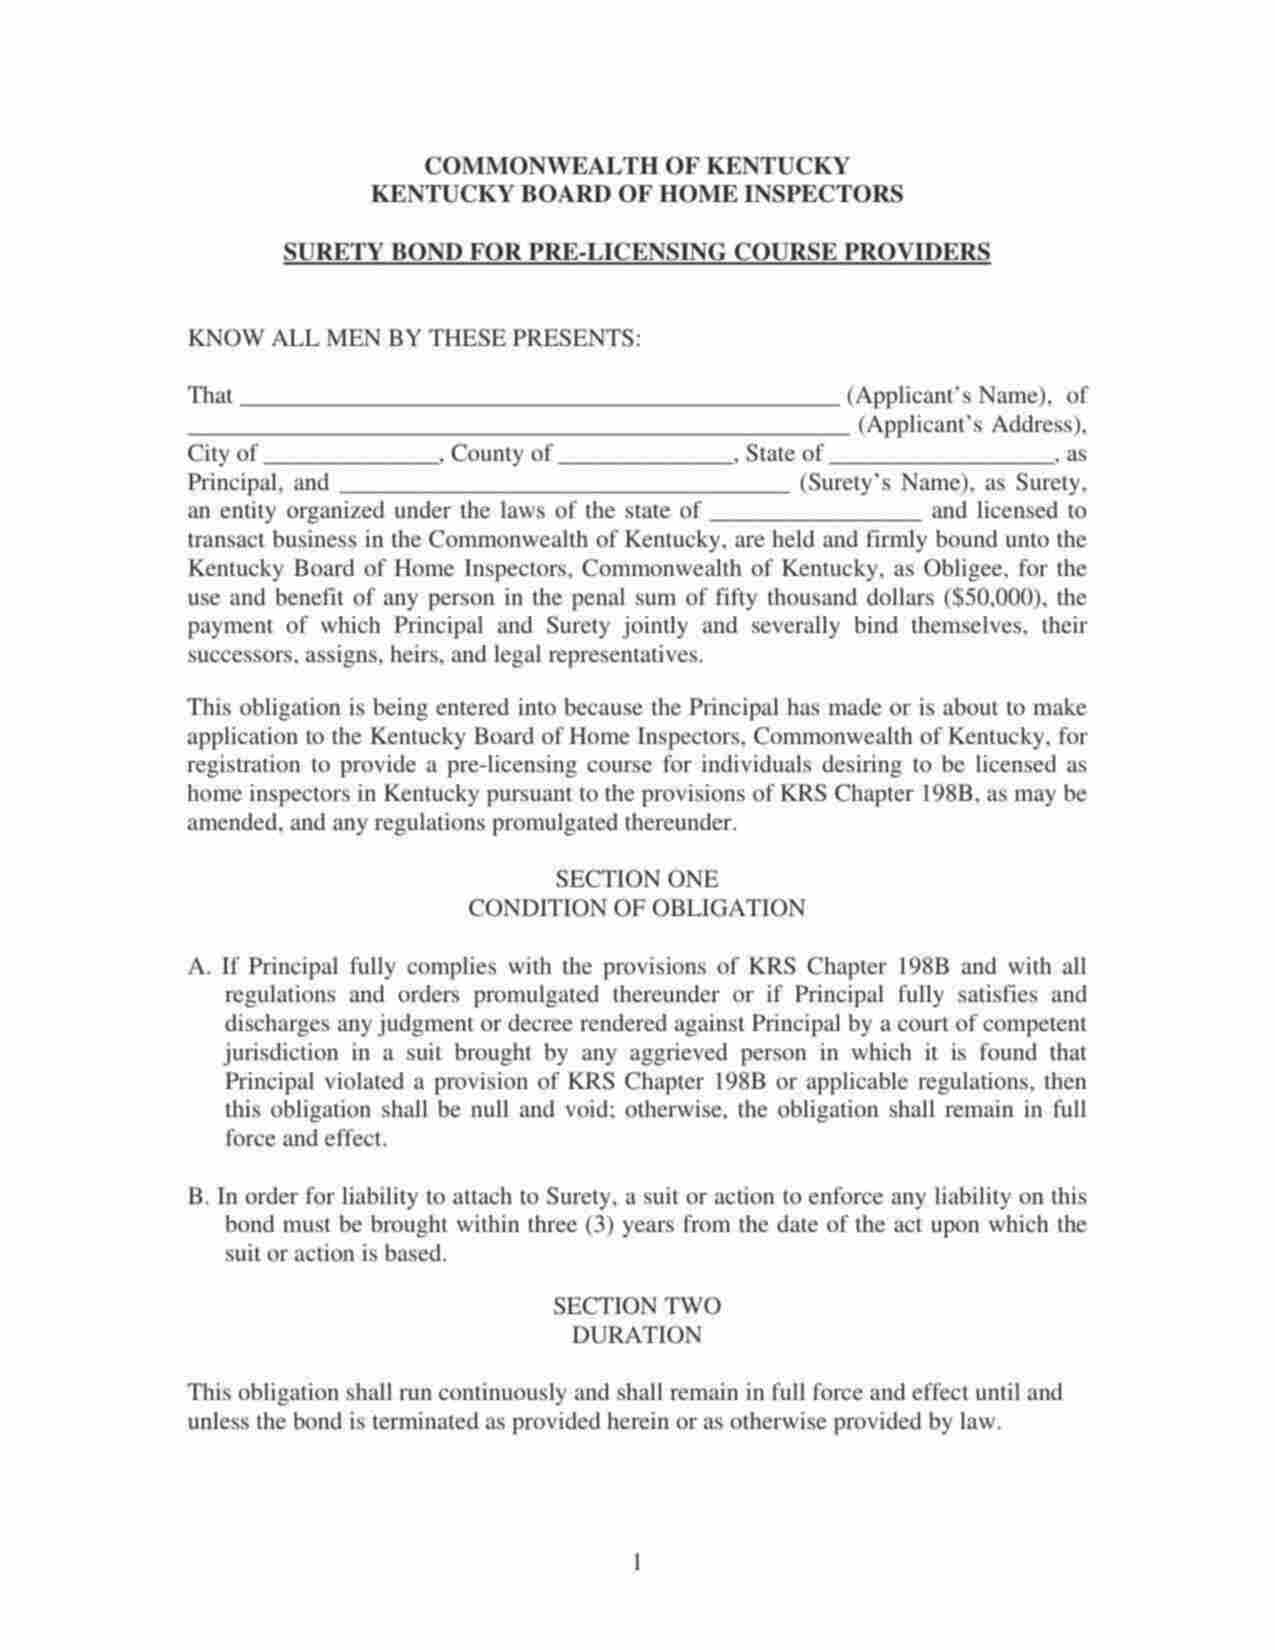 Kentucky Pre-Licensing Home Inspector Course Providers Bond Form